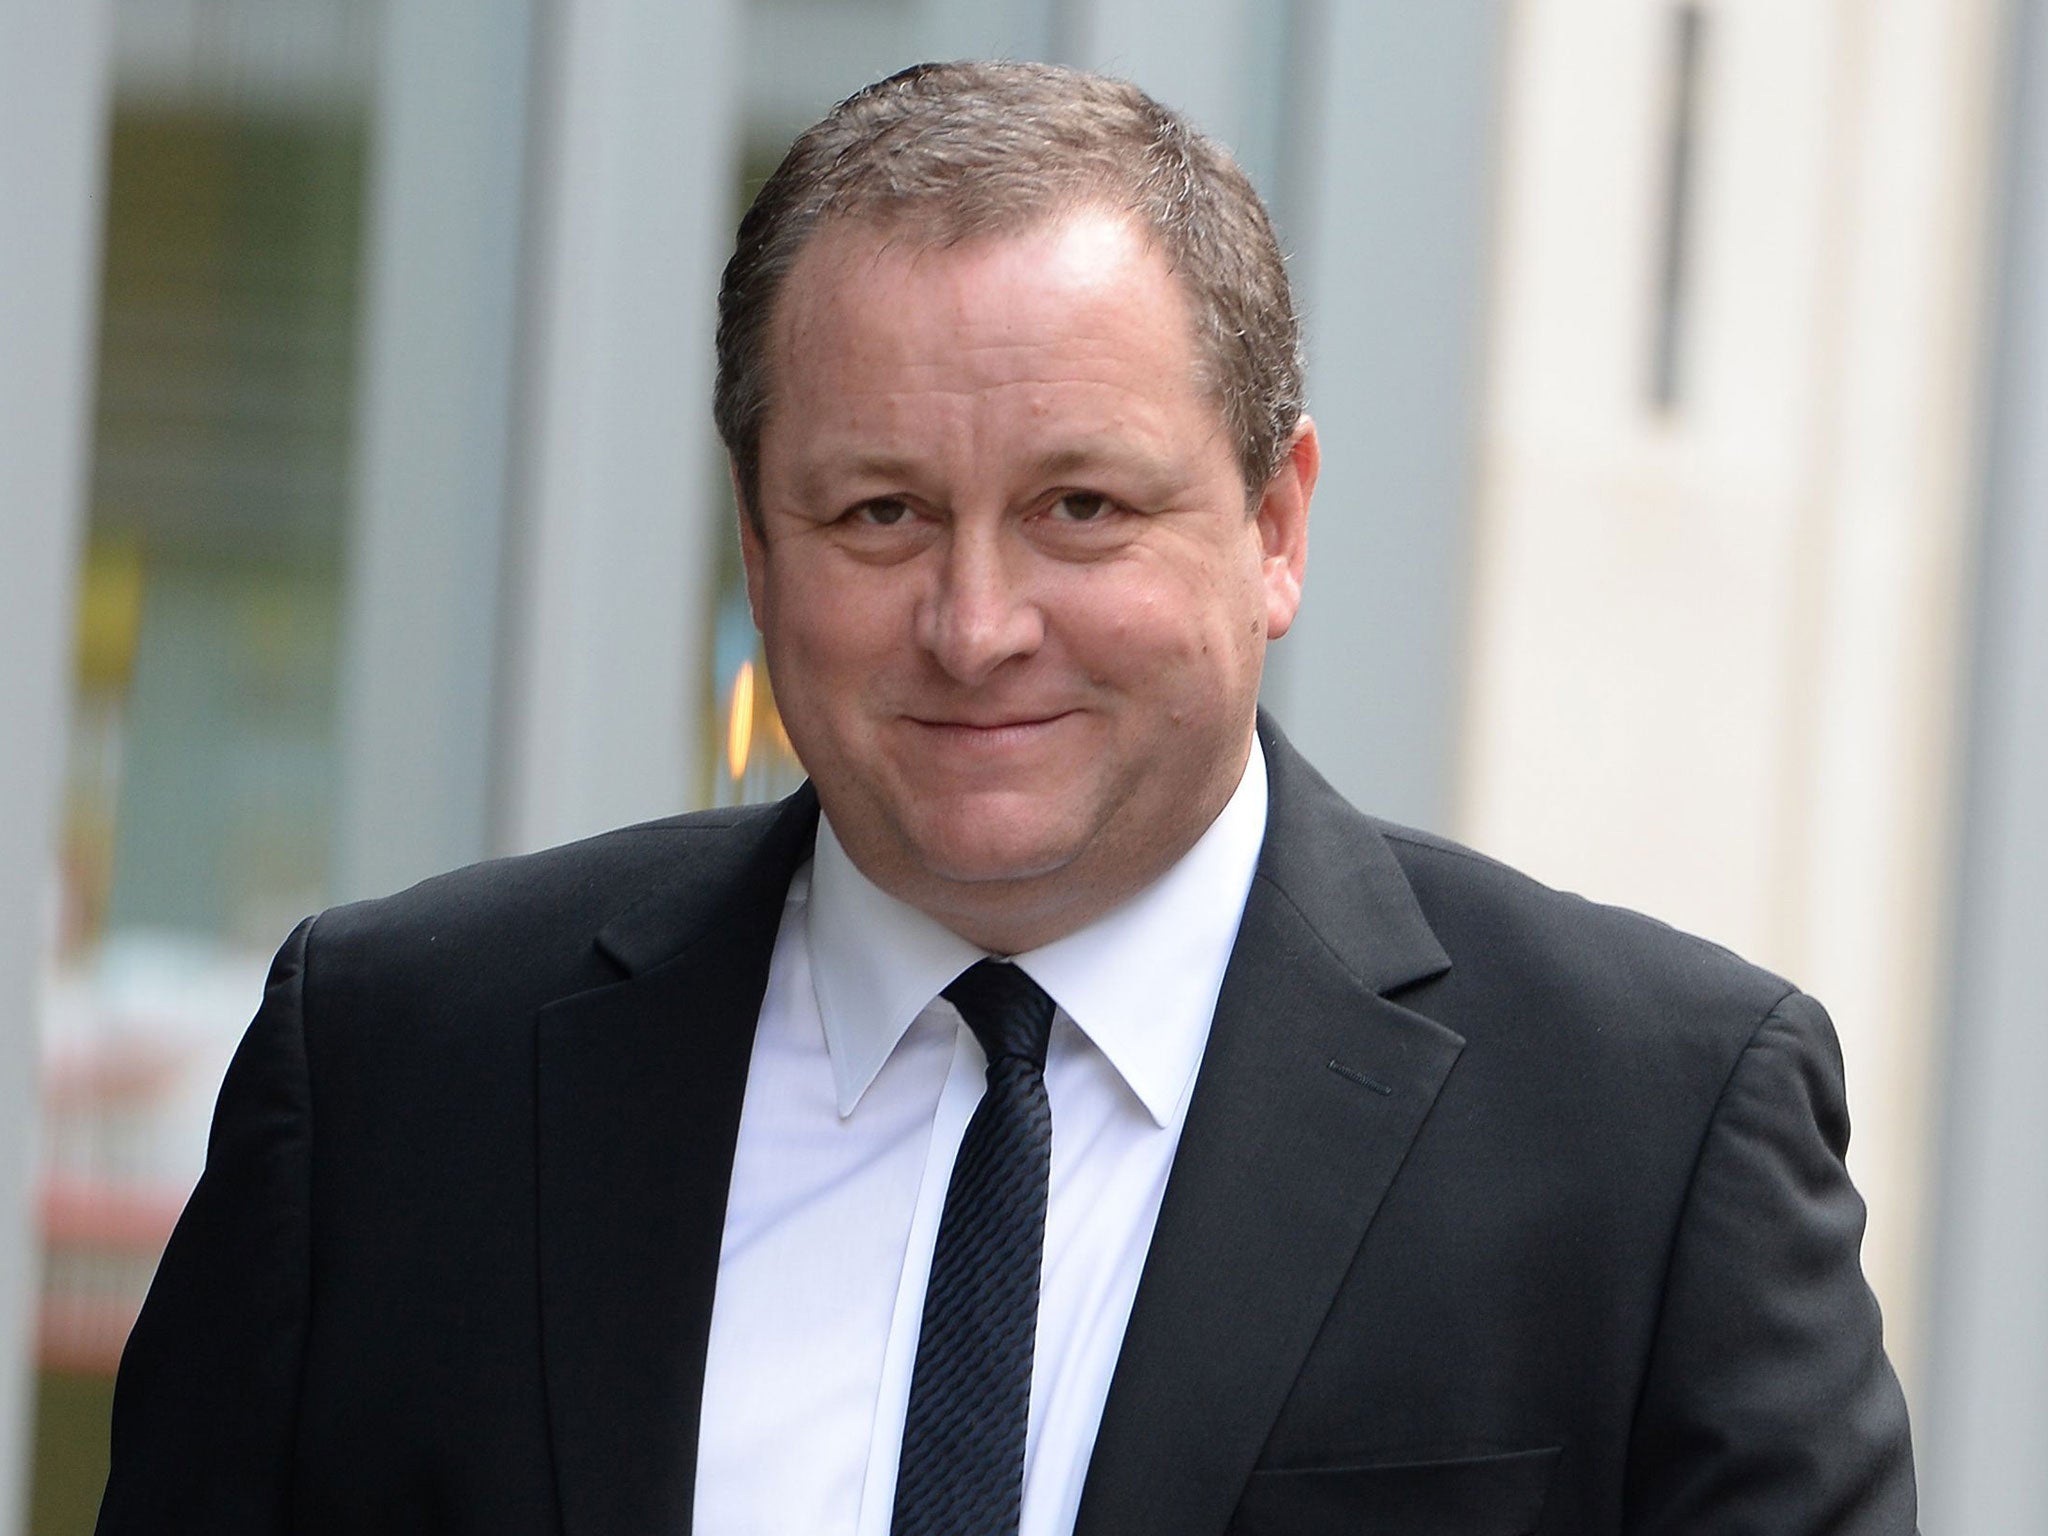 Following a colourful court case, the judge describe the claim against the Sports Direct boss as ‘wishful thinking’